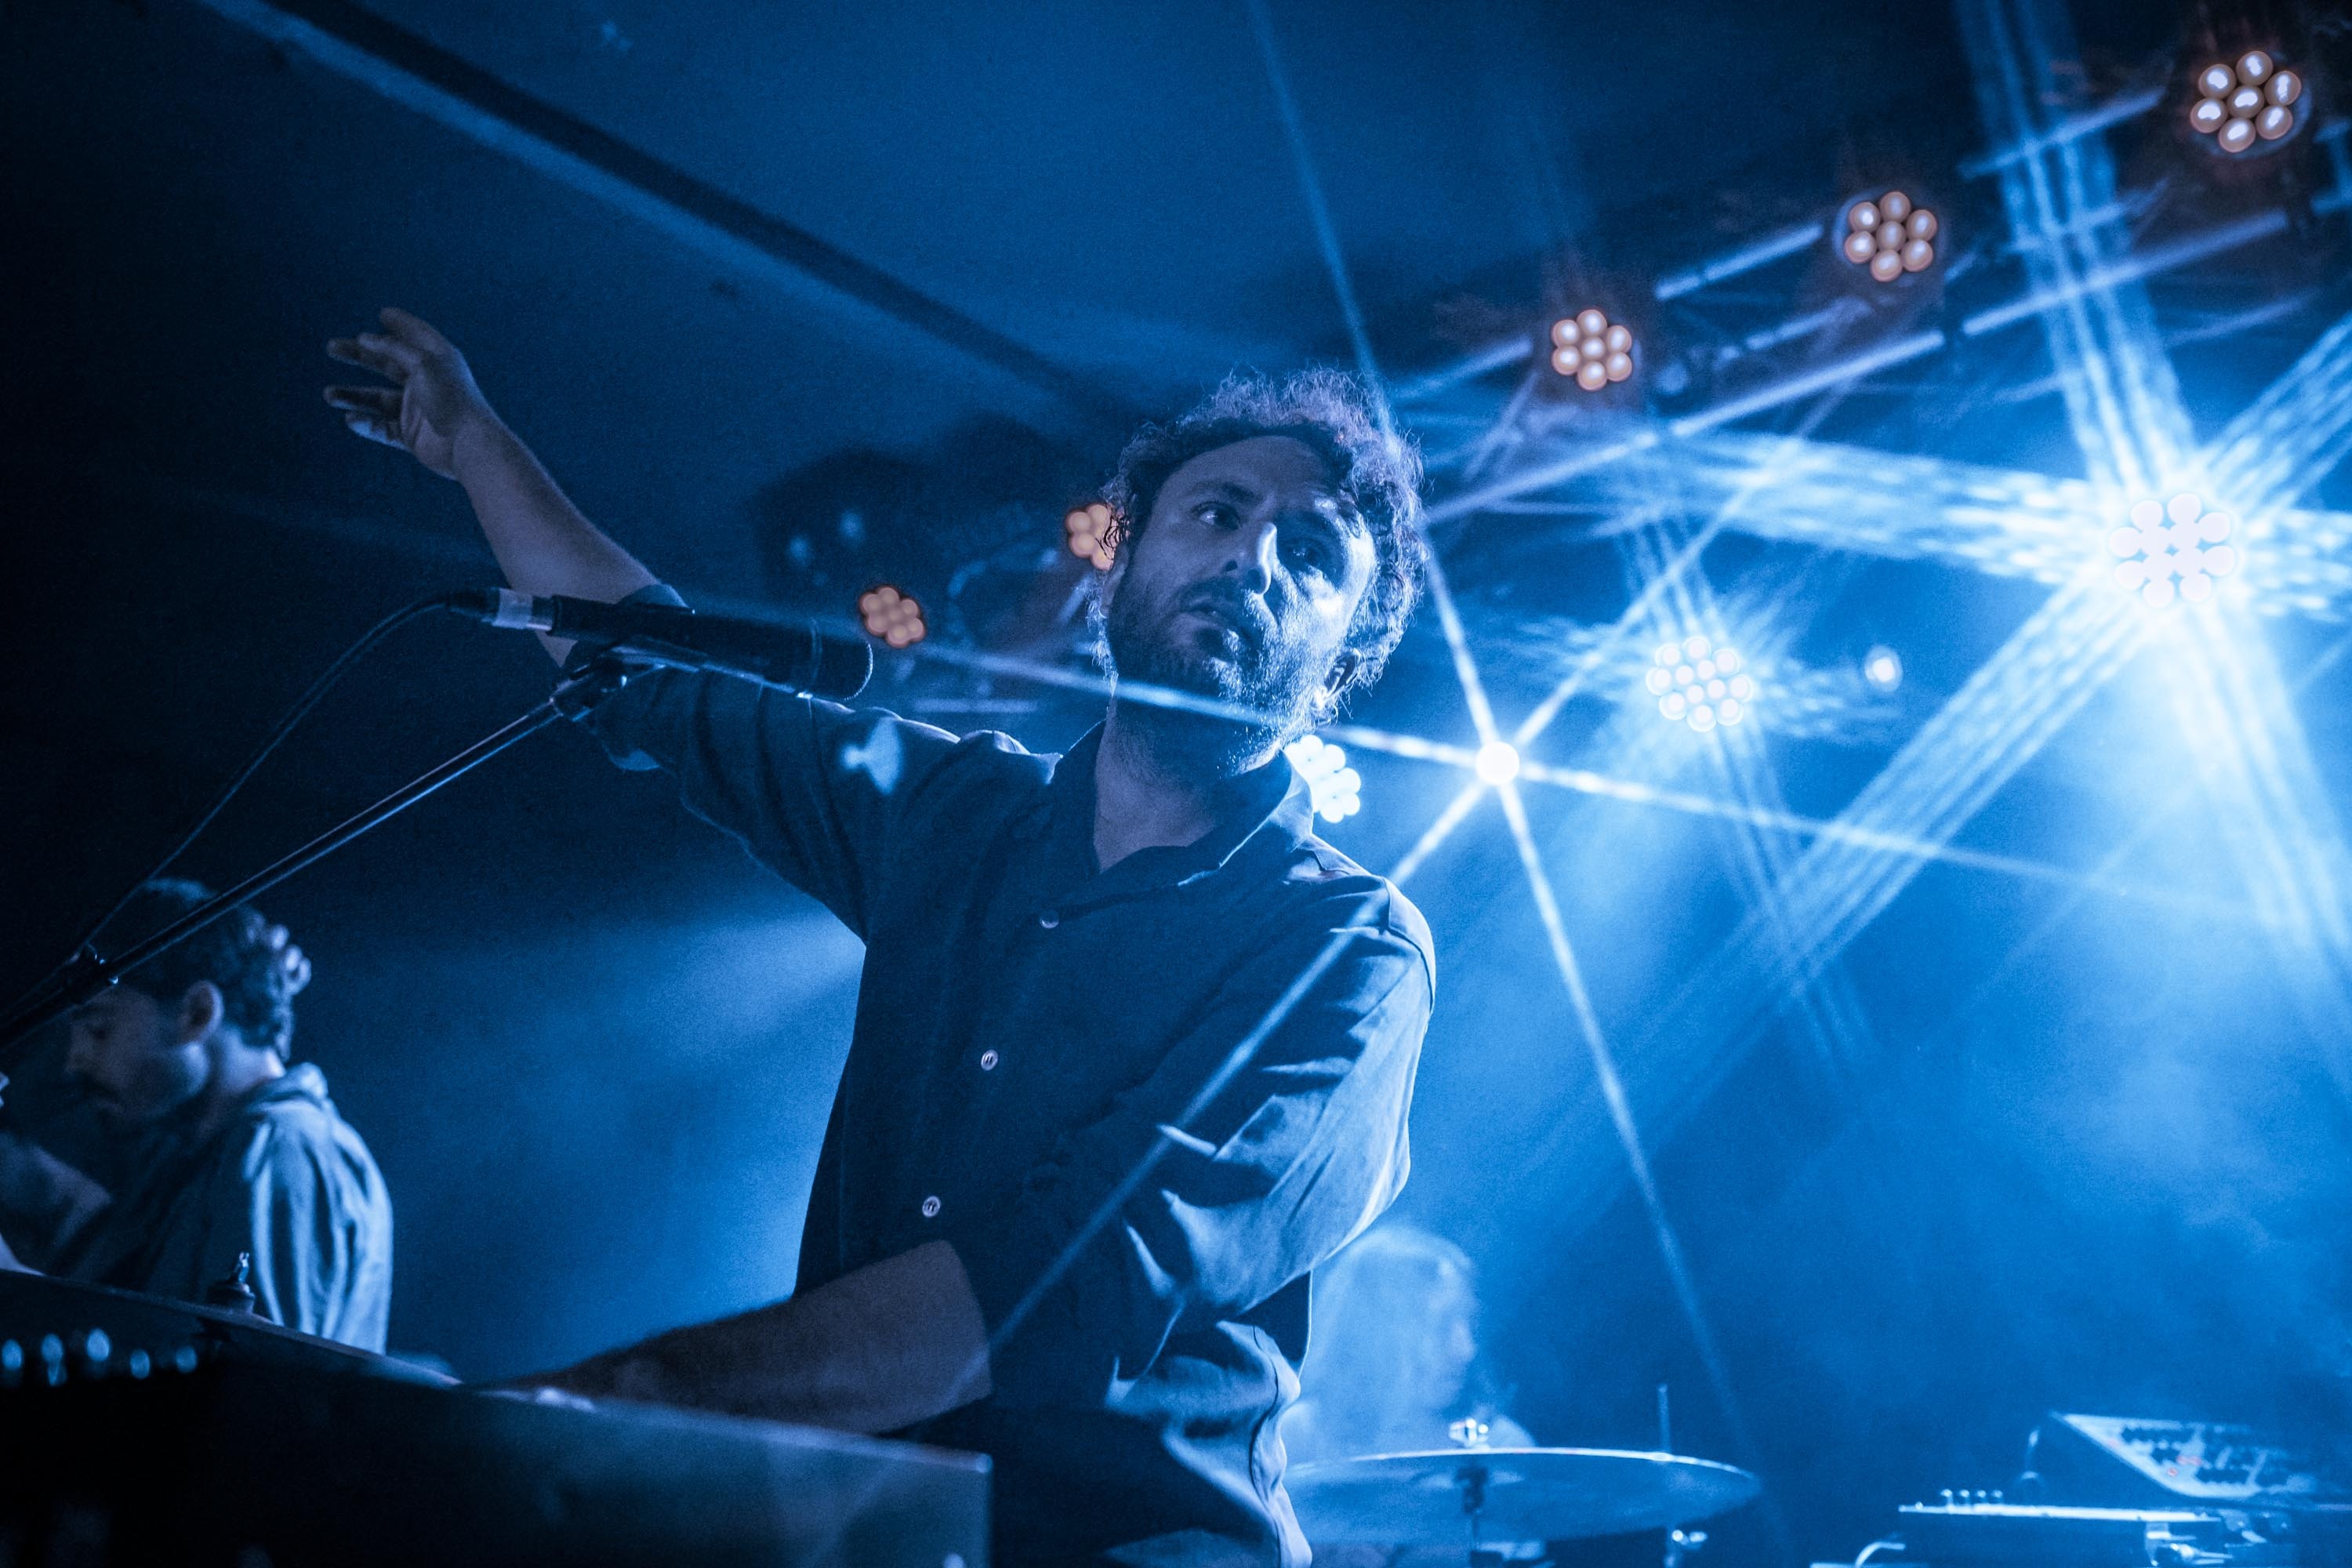 Local Natives Wallpapers (18+ images inside)